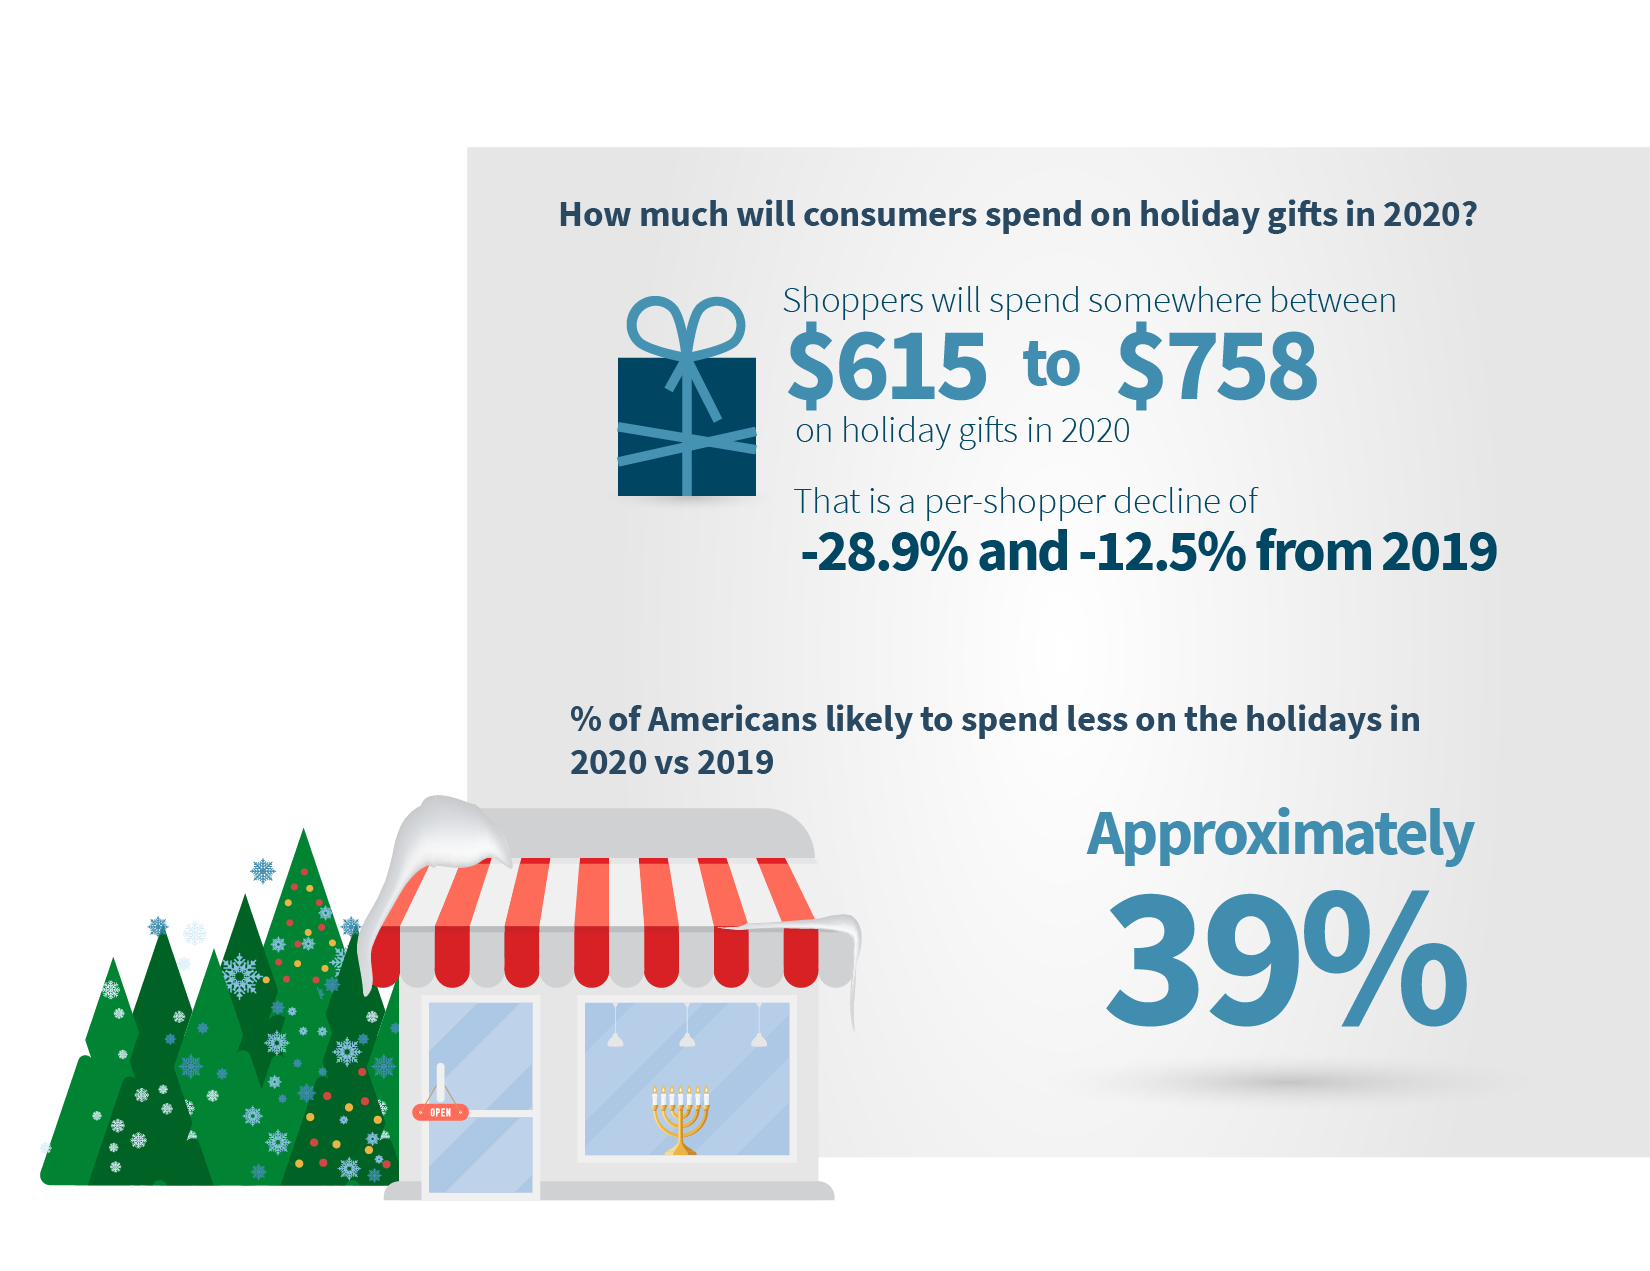 Marketing for holidays is more important this year, with 39% of American shoppers spending less than last year